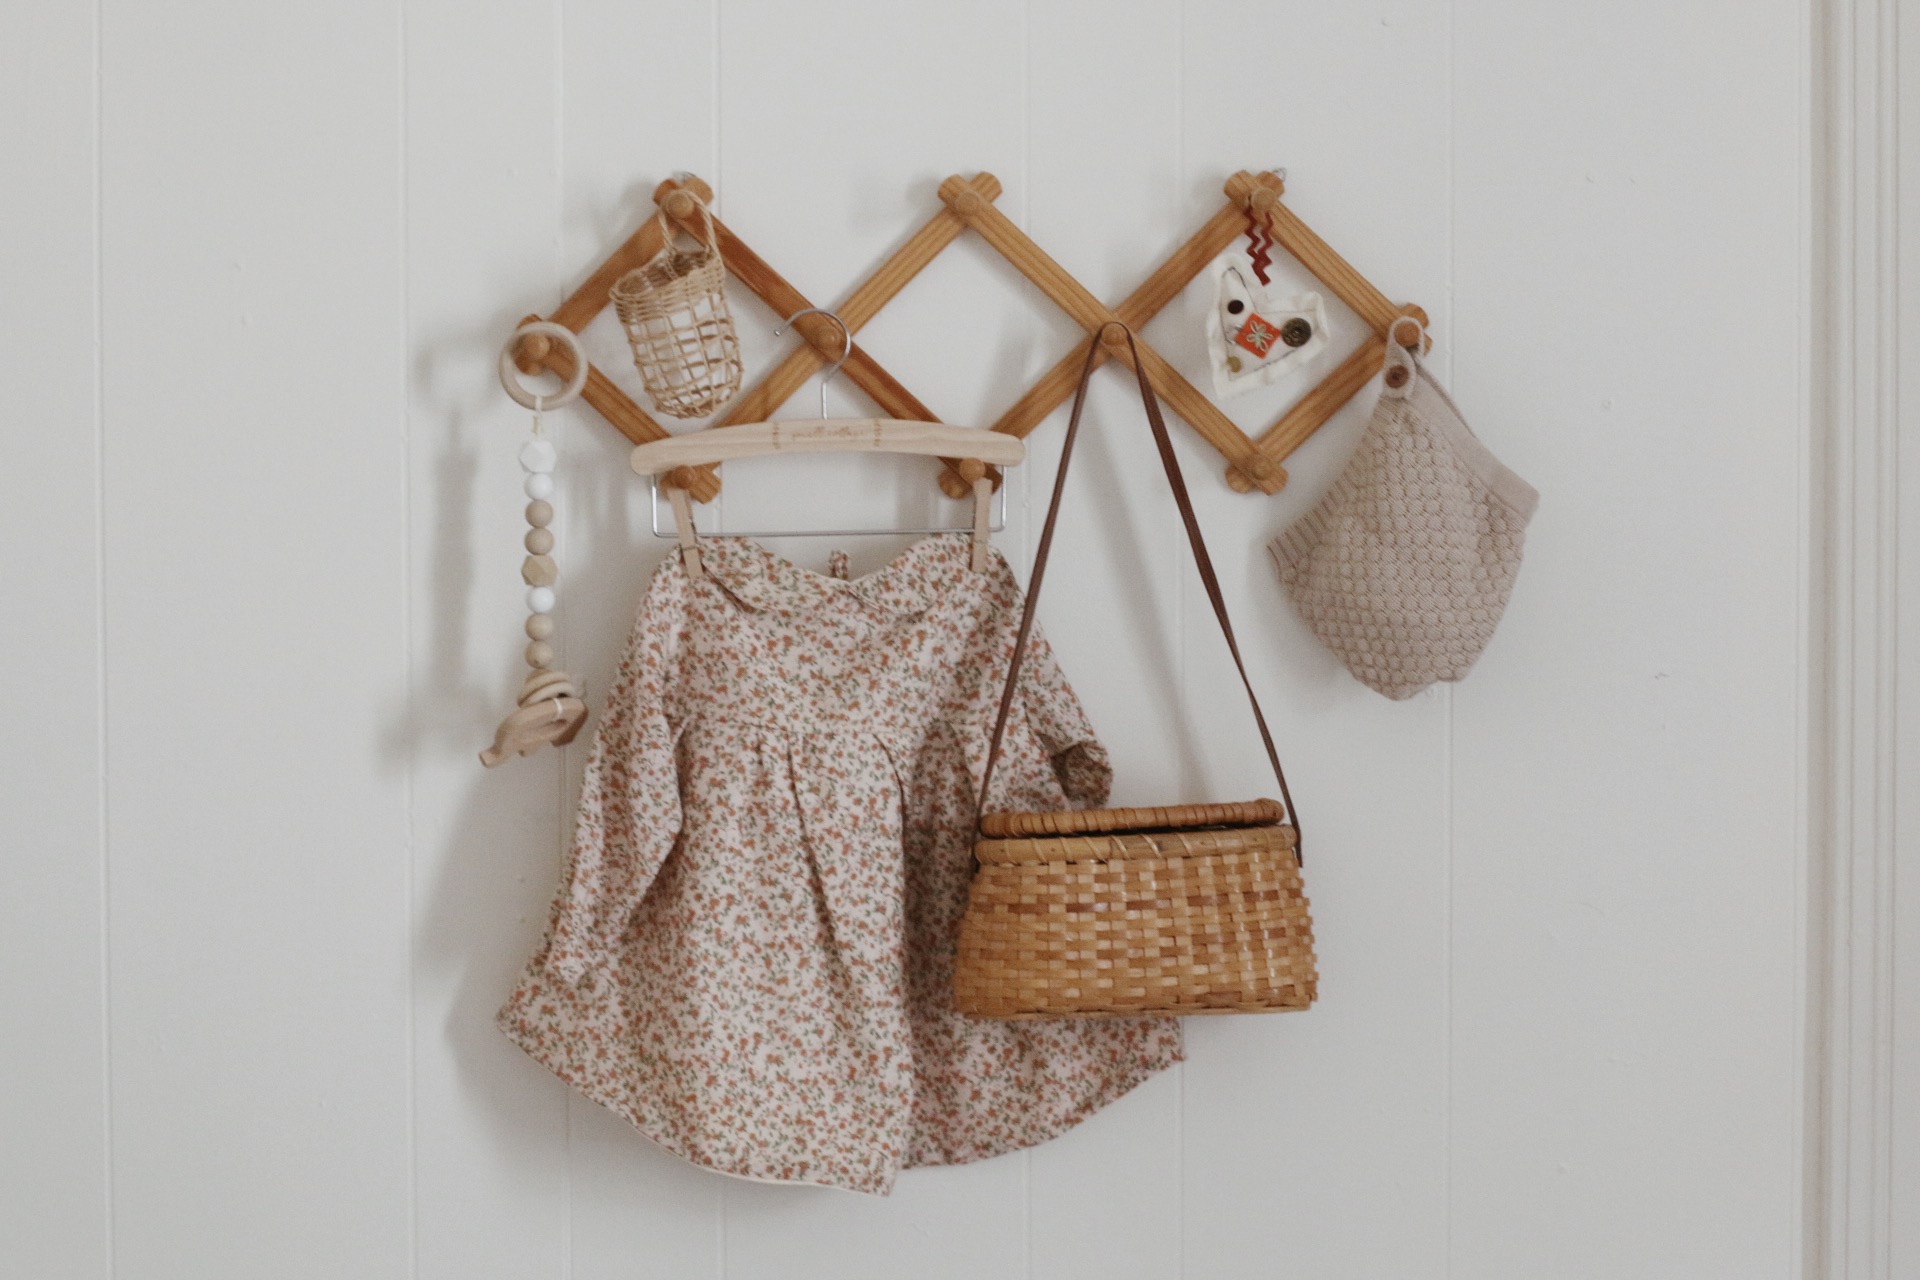 accordion wall rack with baby items hanging on it